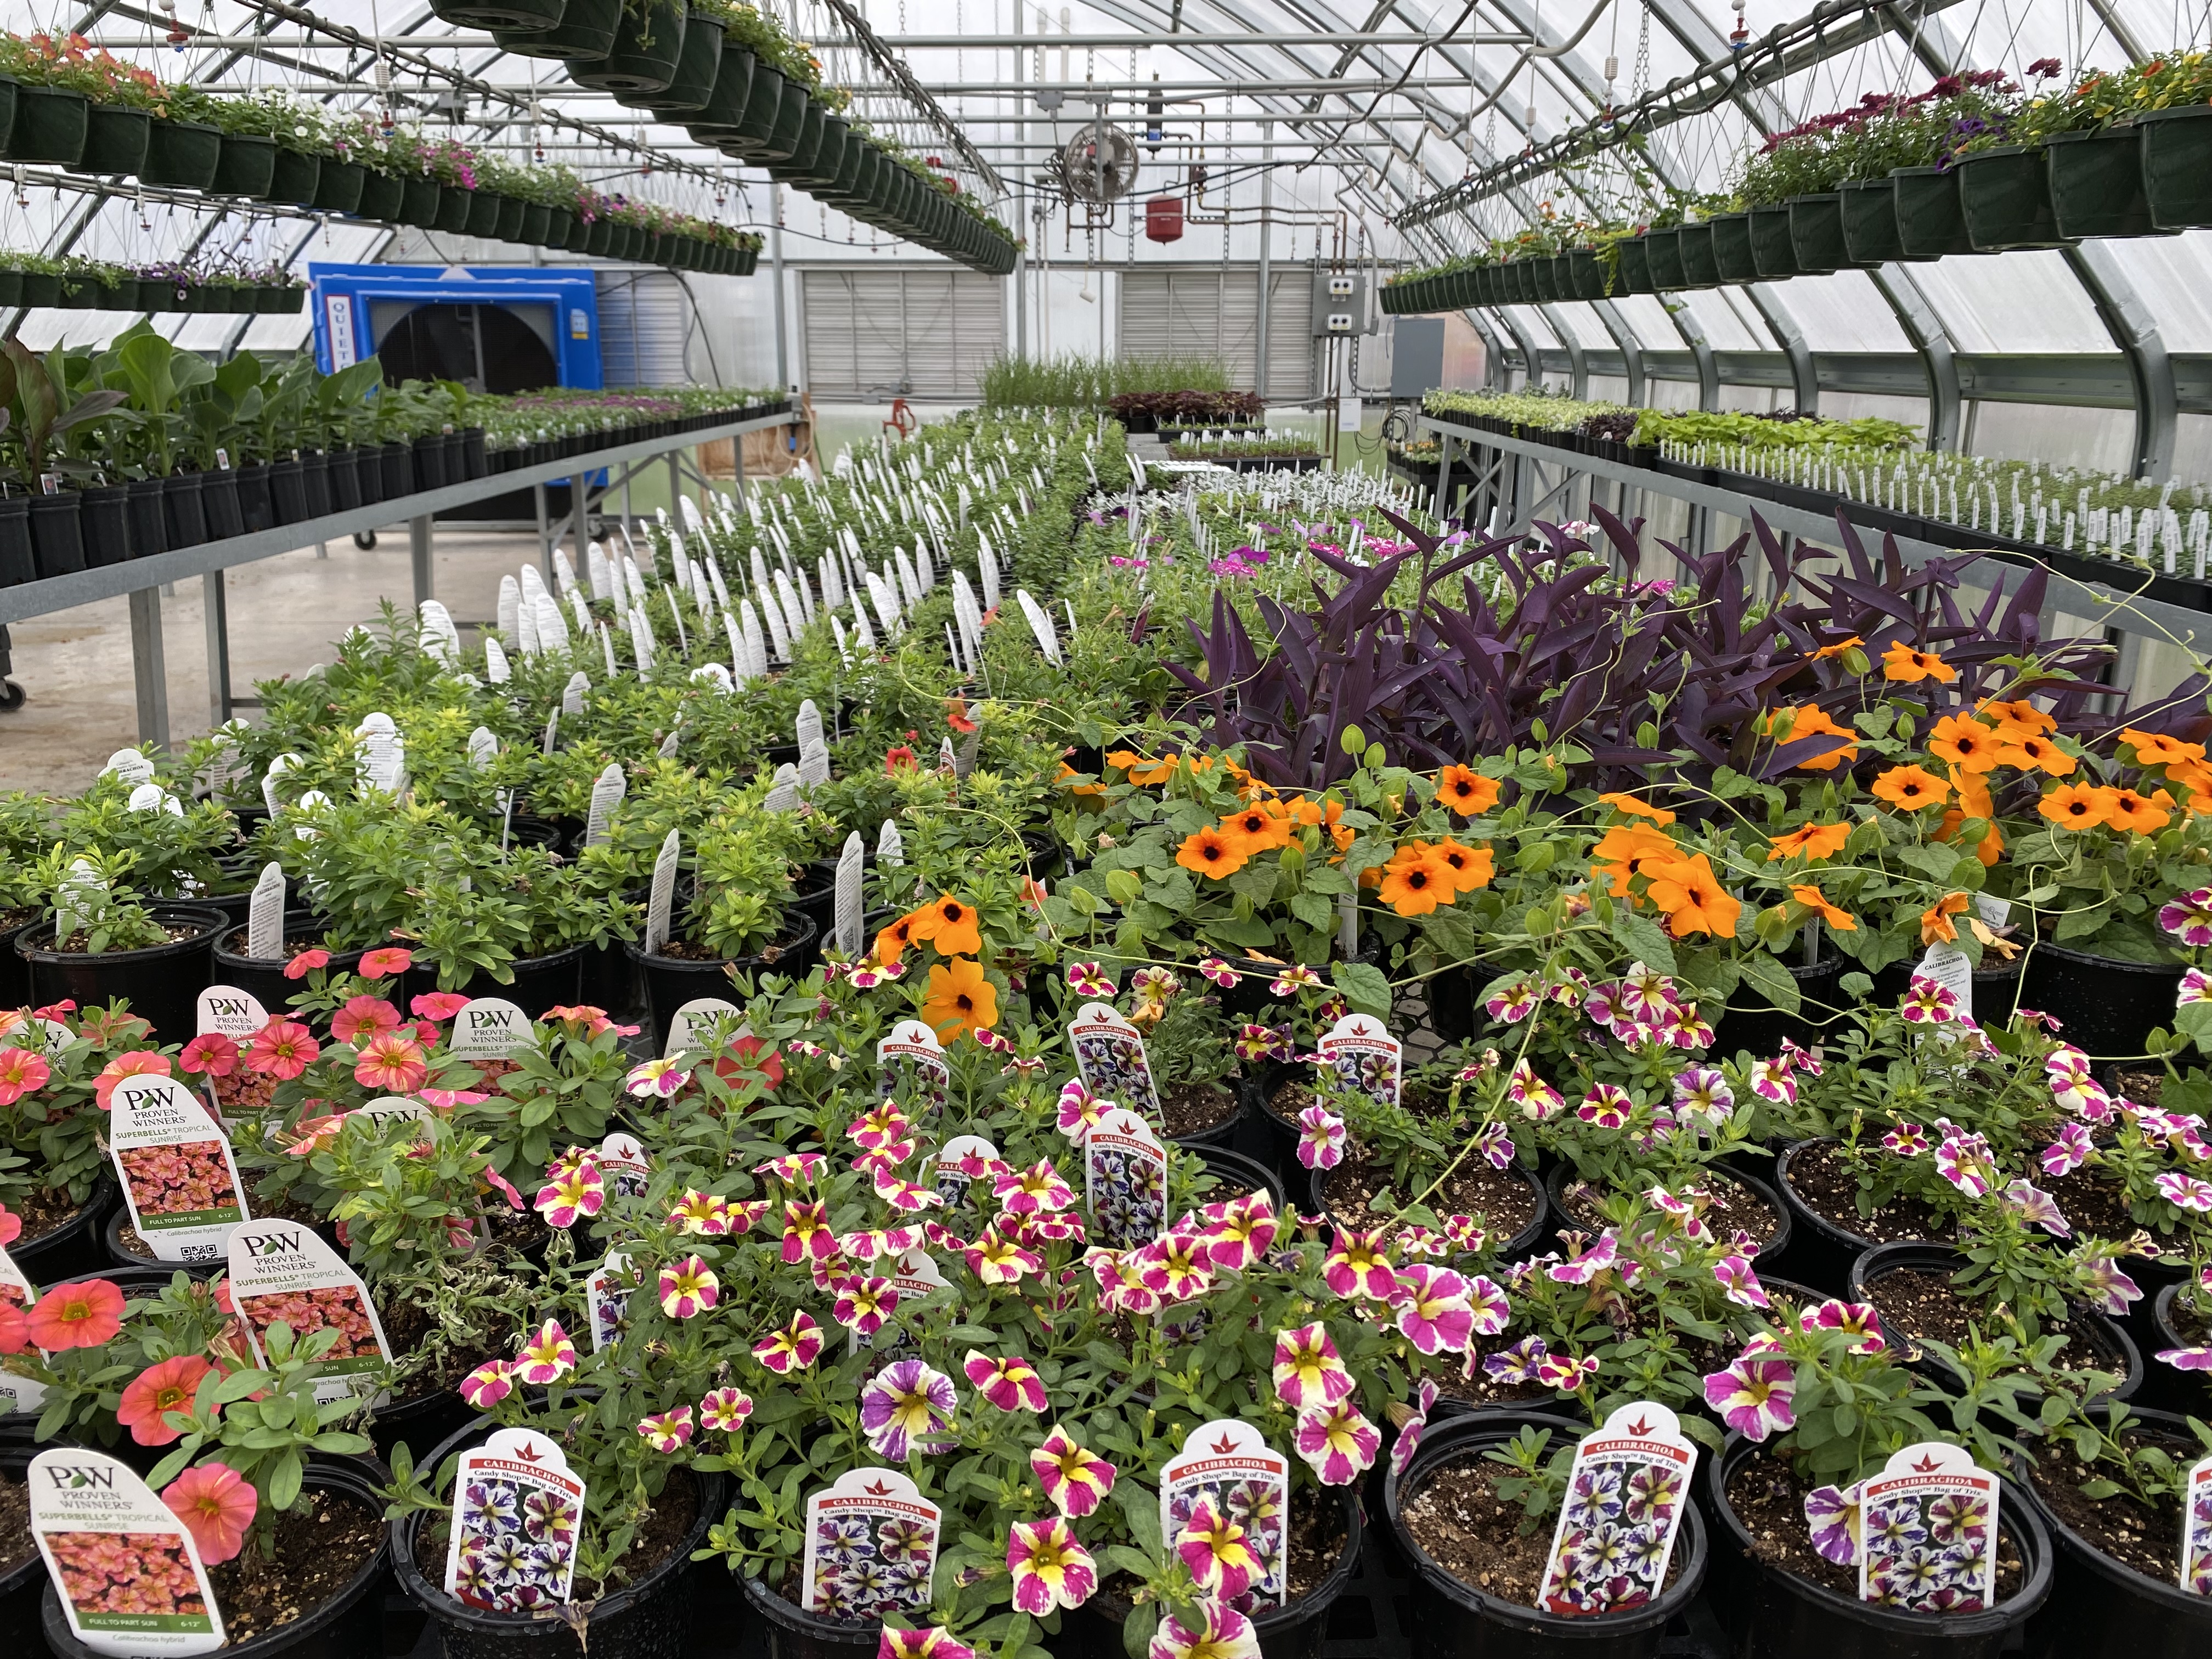 Flowers in a greenhouse